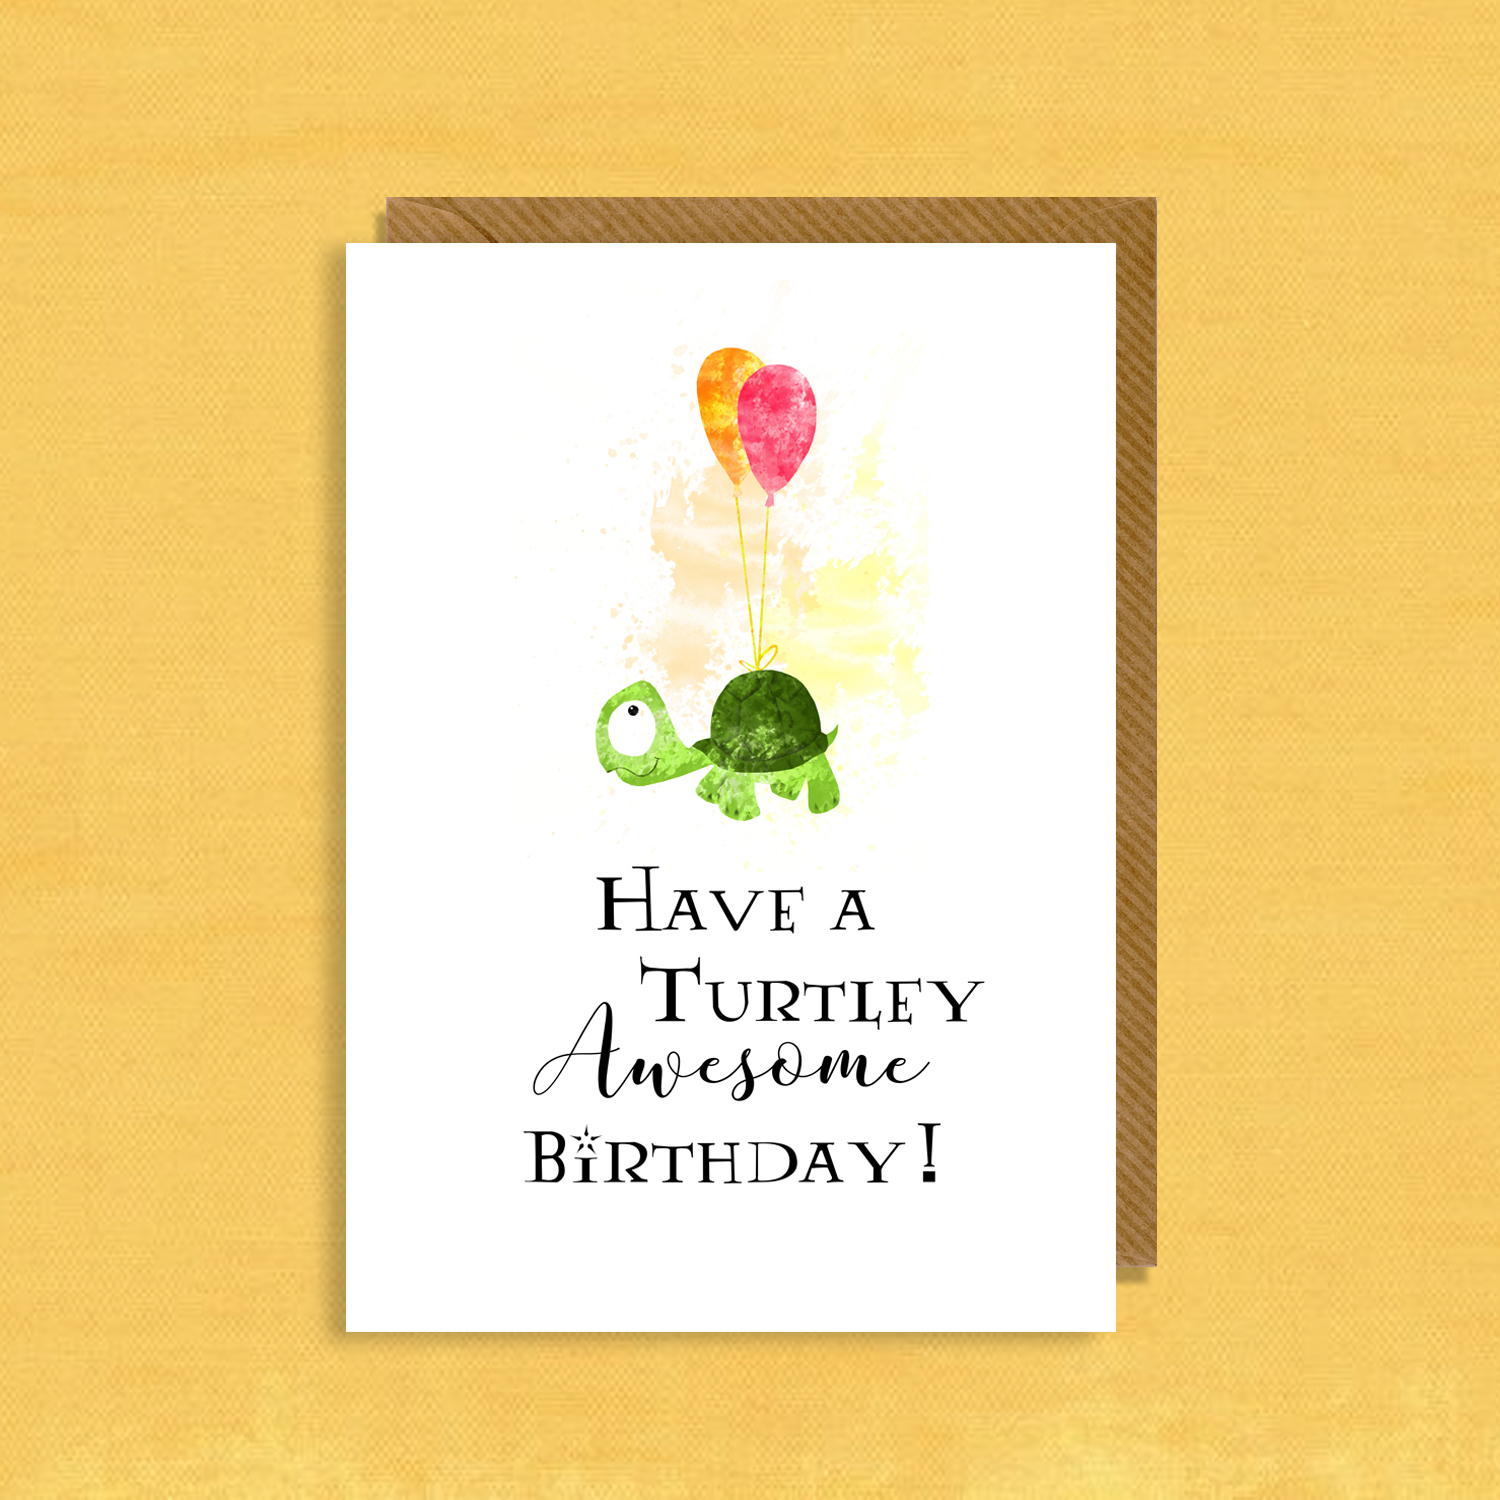 If you are looking for a thoughtful or super funny birthday card for your friends and family check out our awesome greeting cards and find something for everyone